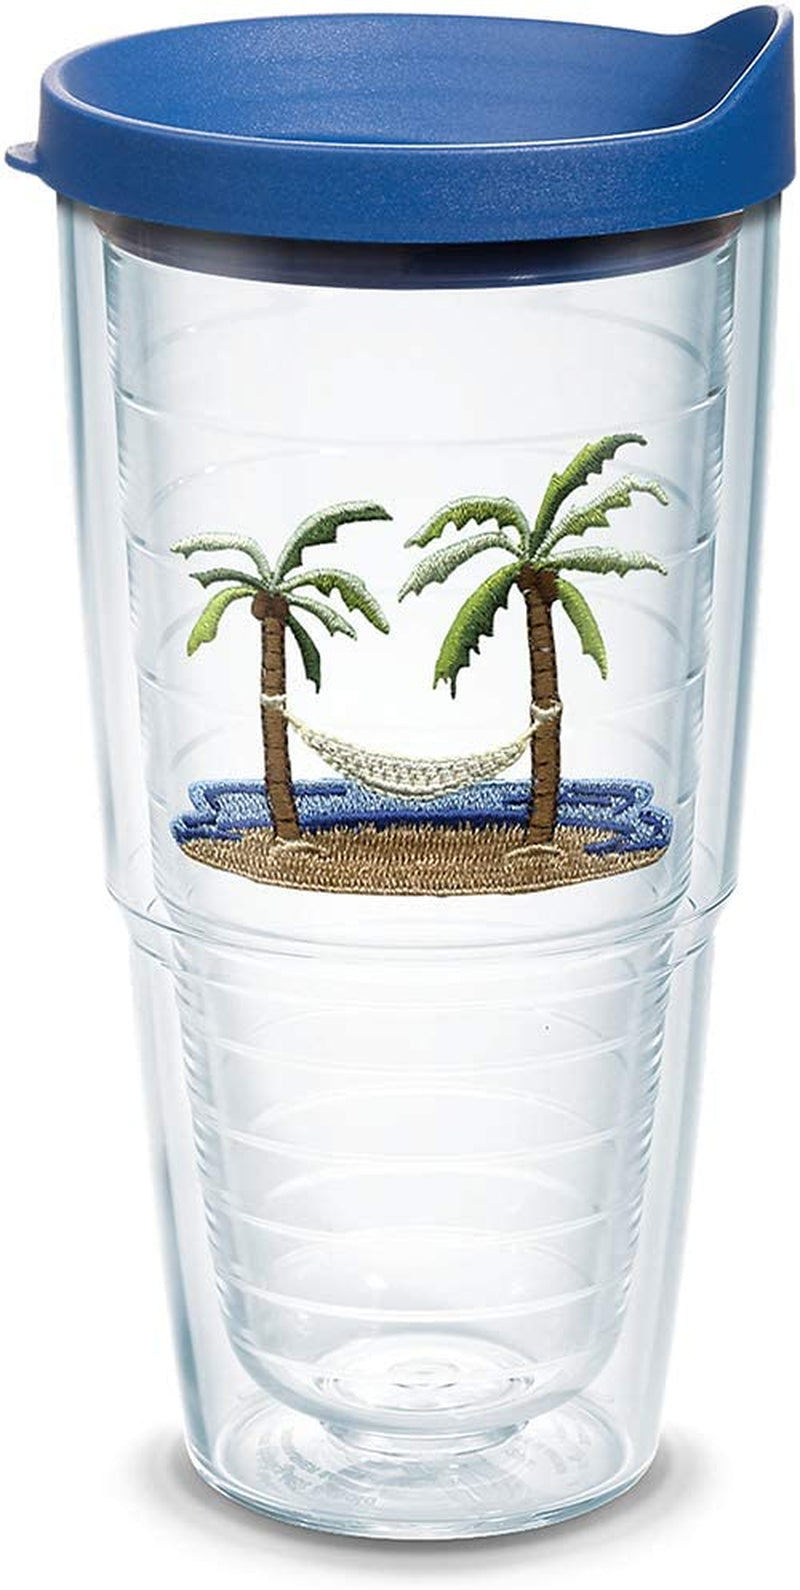 TERVIS Tumbler, 16-Ounce, "Palm Trees and Hammock", 2-Pack , Clear - 1035967